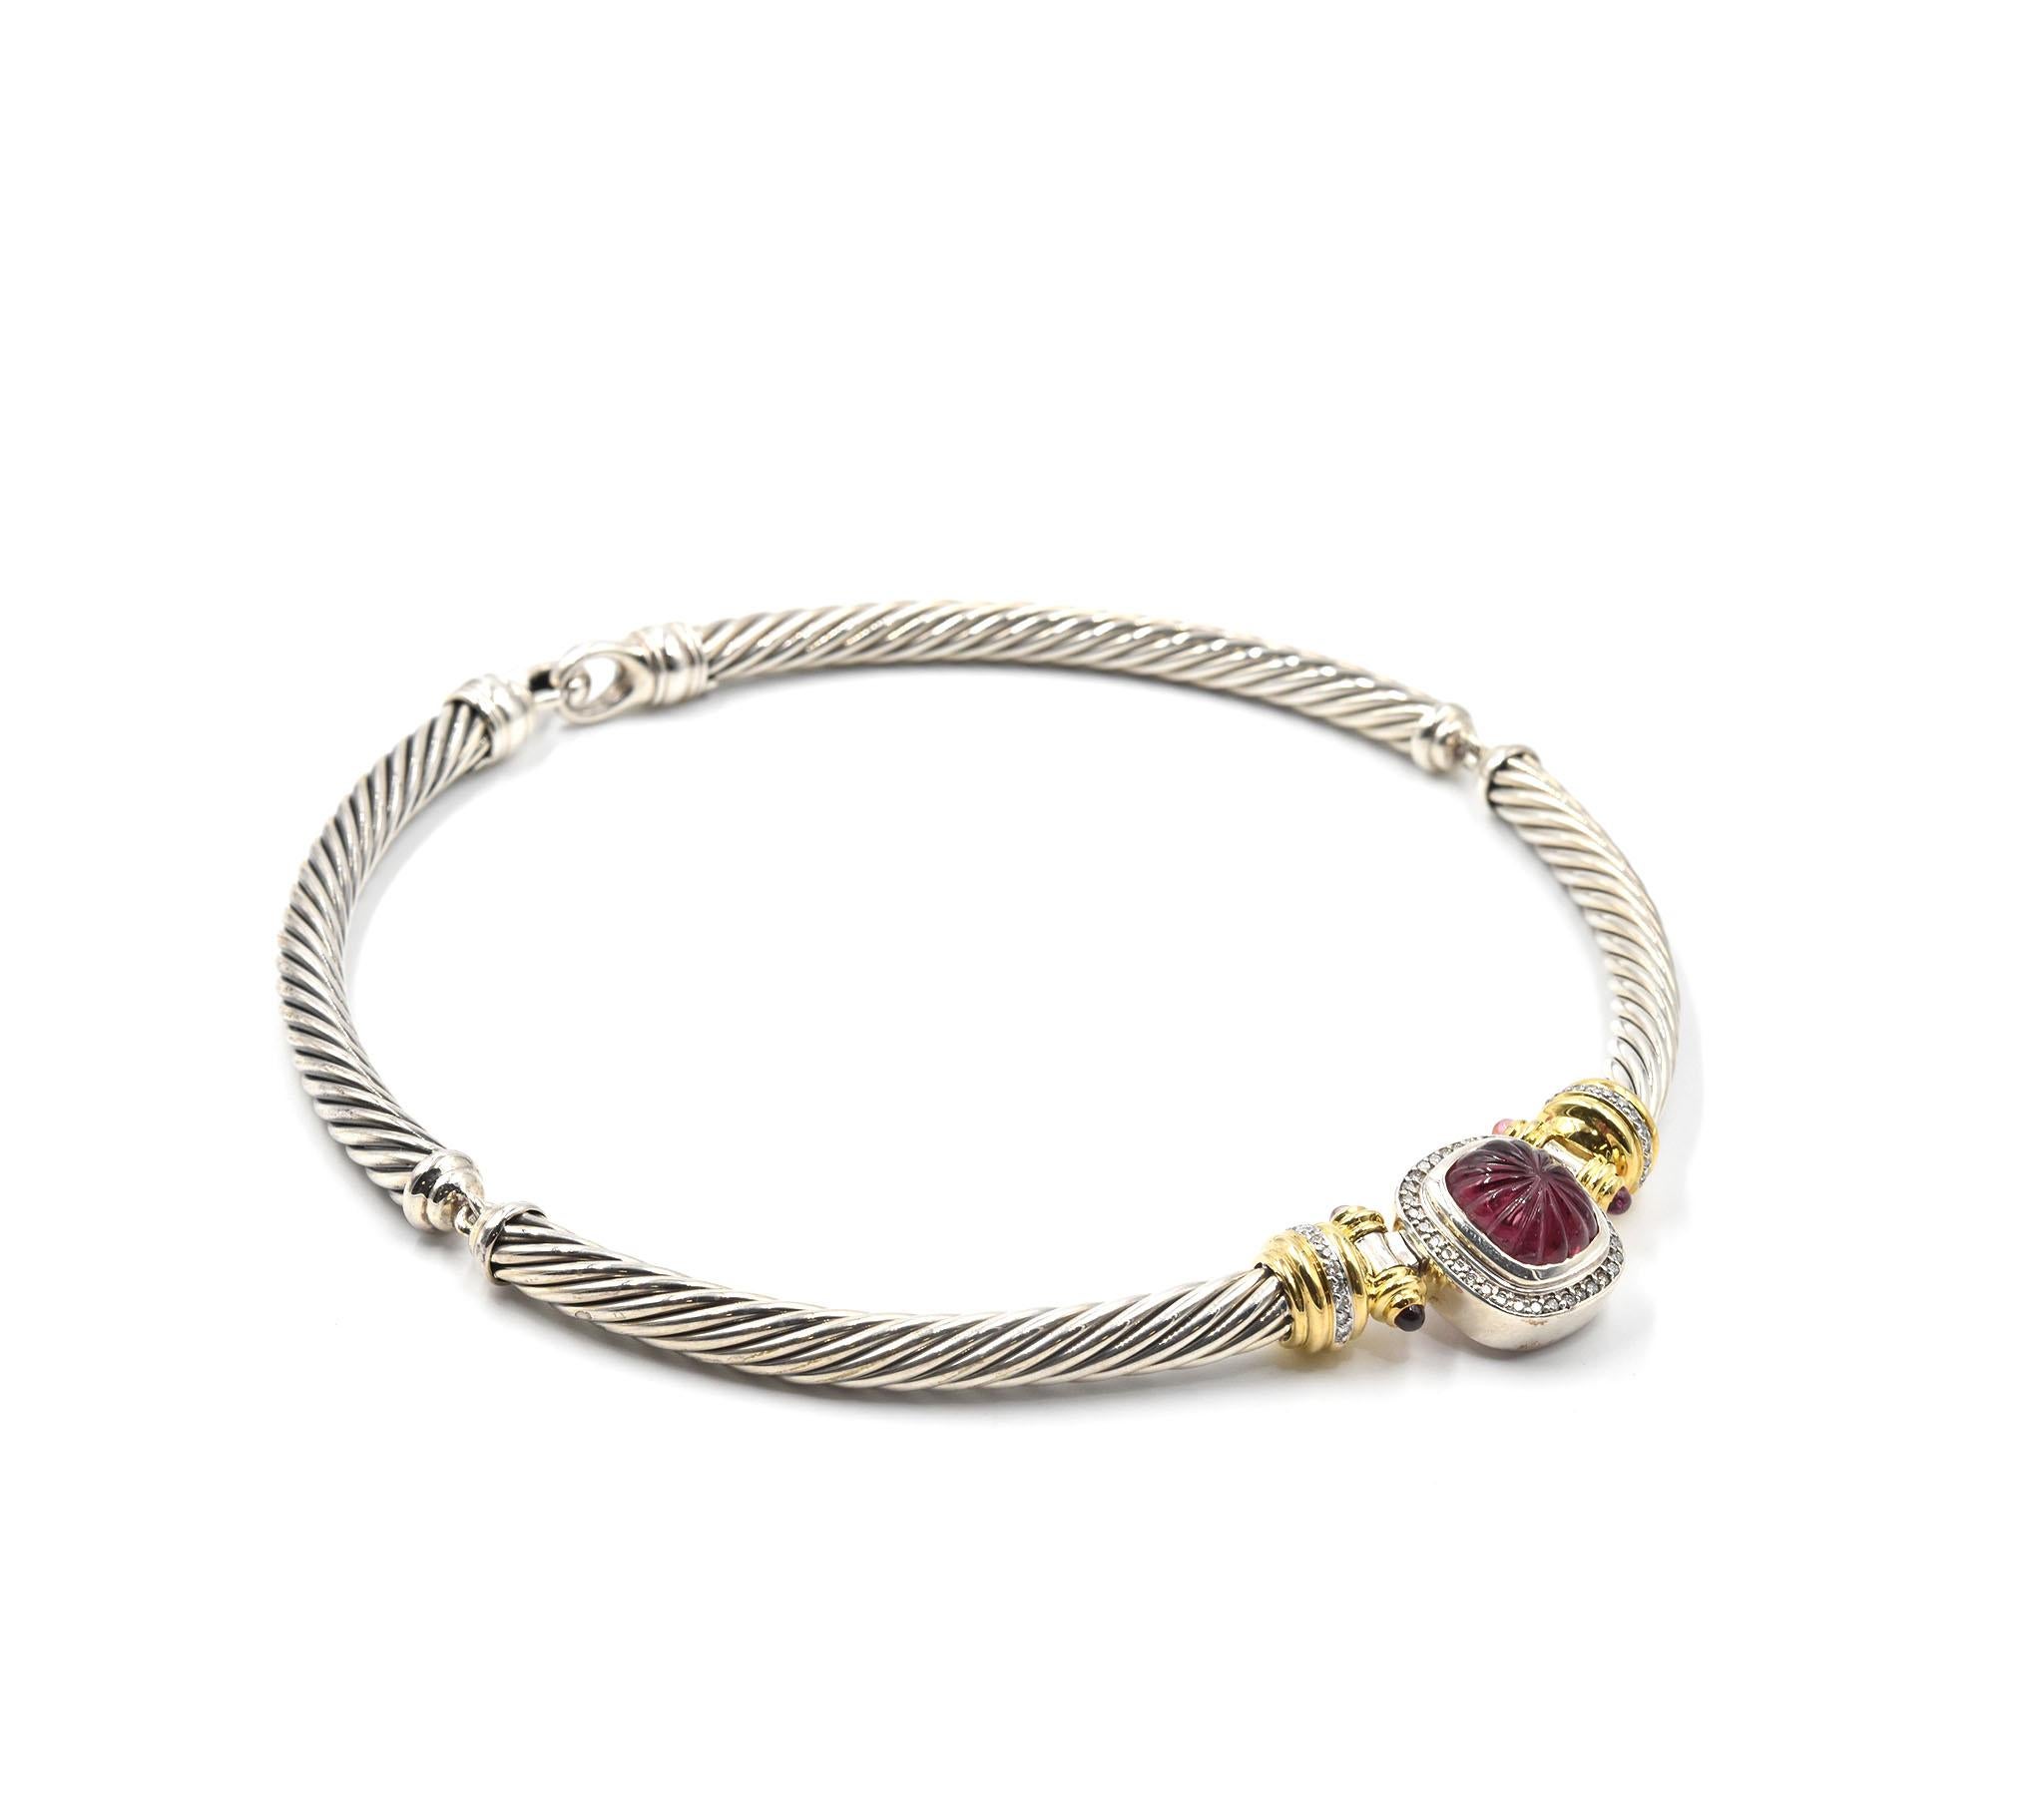 Designer: David Yurman
Material: 18k yellow gold & sterling silver
Pink Tourmaline: carved cabochon pink tourmaline
Diamonds: 60 round brilliant cut = 0.60 carat total weight
Dimensions: choker necklace is 14-inch long and 1/4-inch wide
Weight: